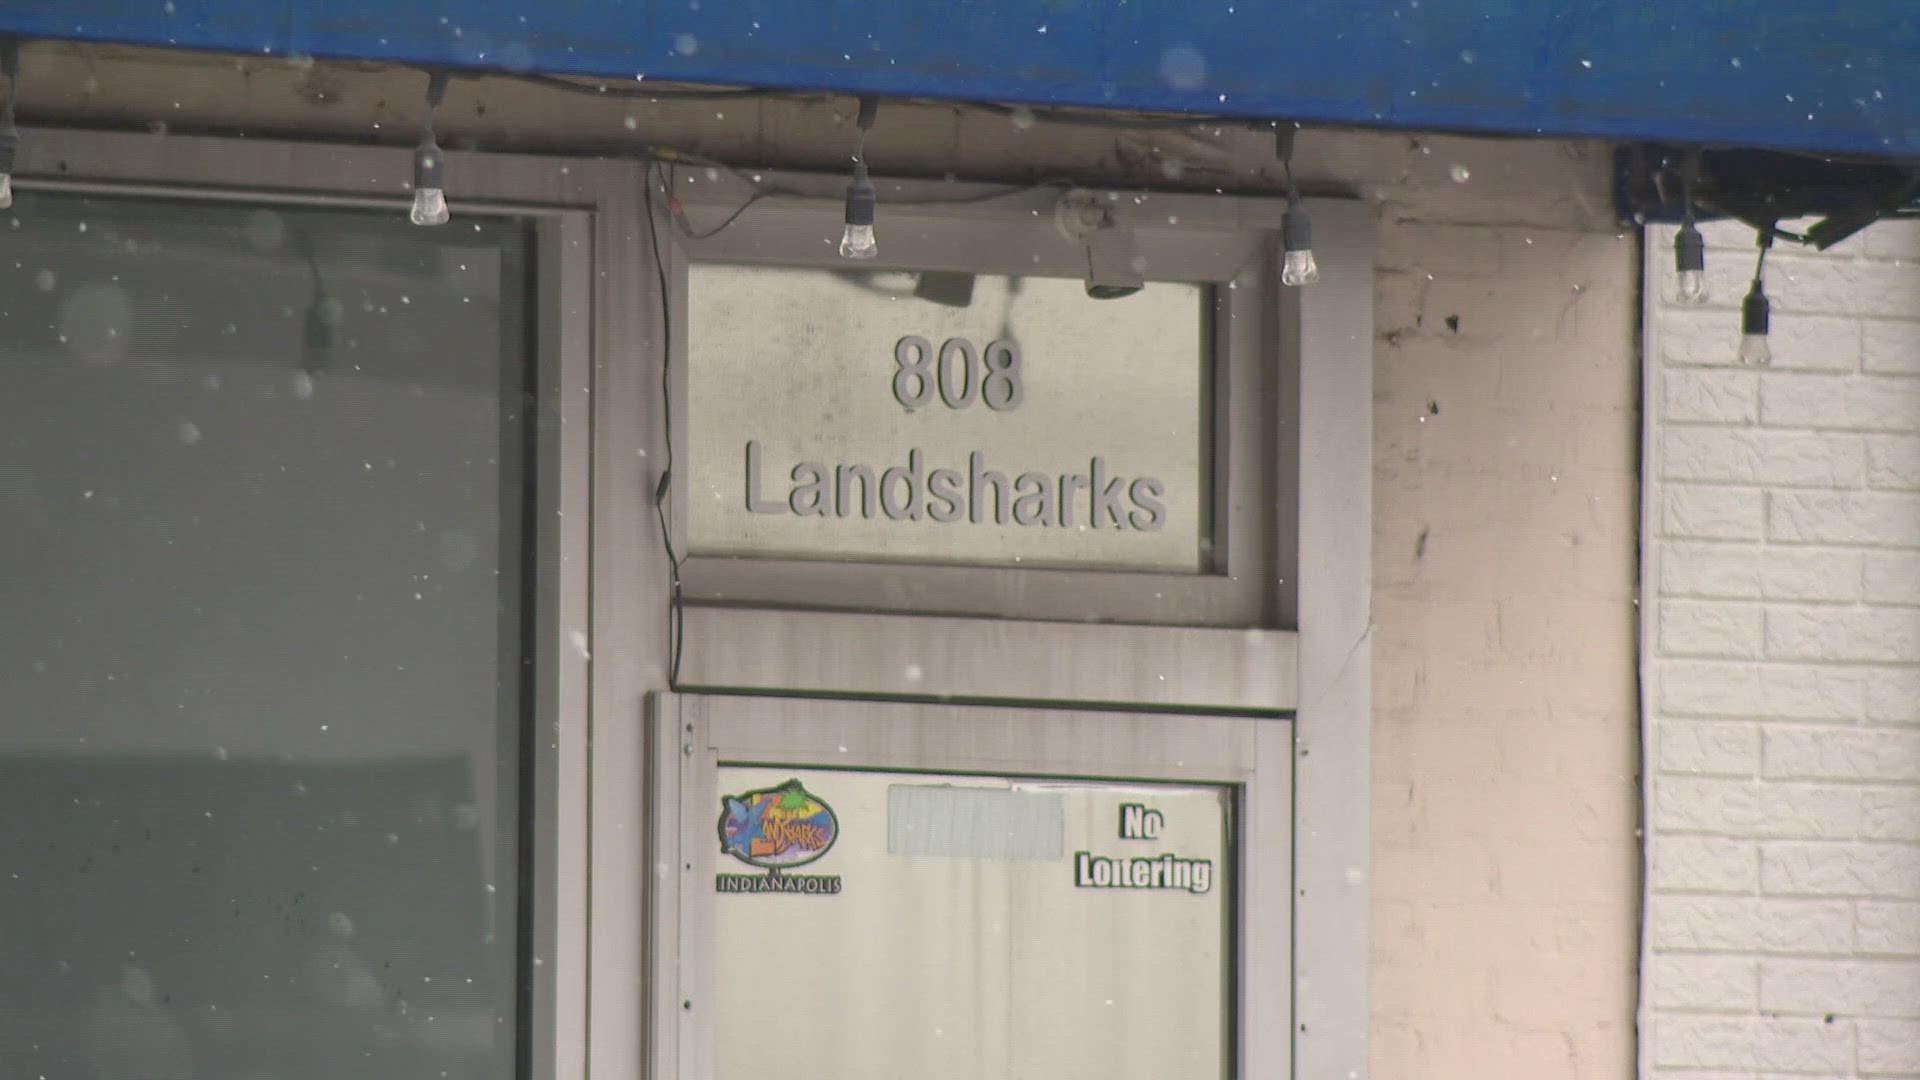 The shooting happened shortly before 1:30 a.m. at Landsharks in the 800 block of Broad Ripple Avenue, IMPD confirmed.